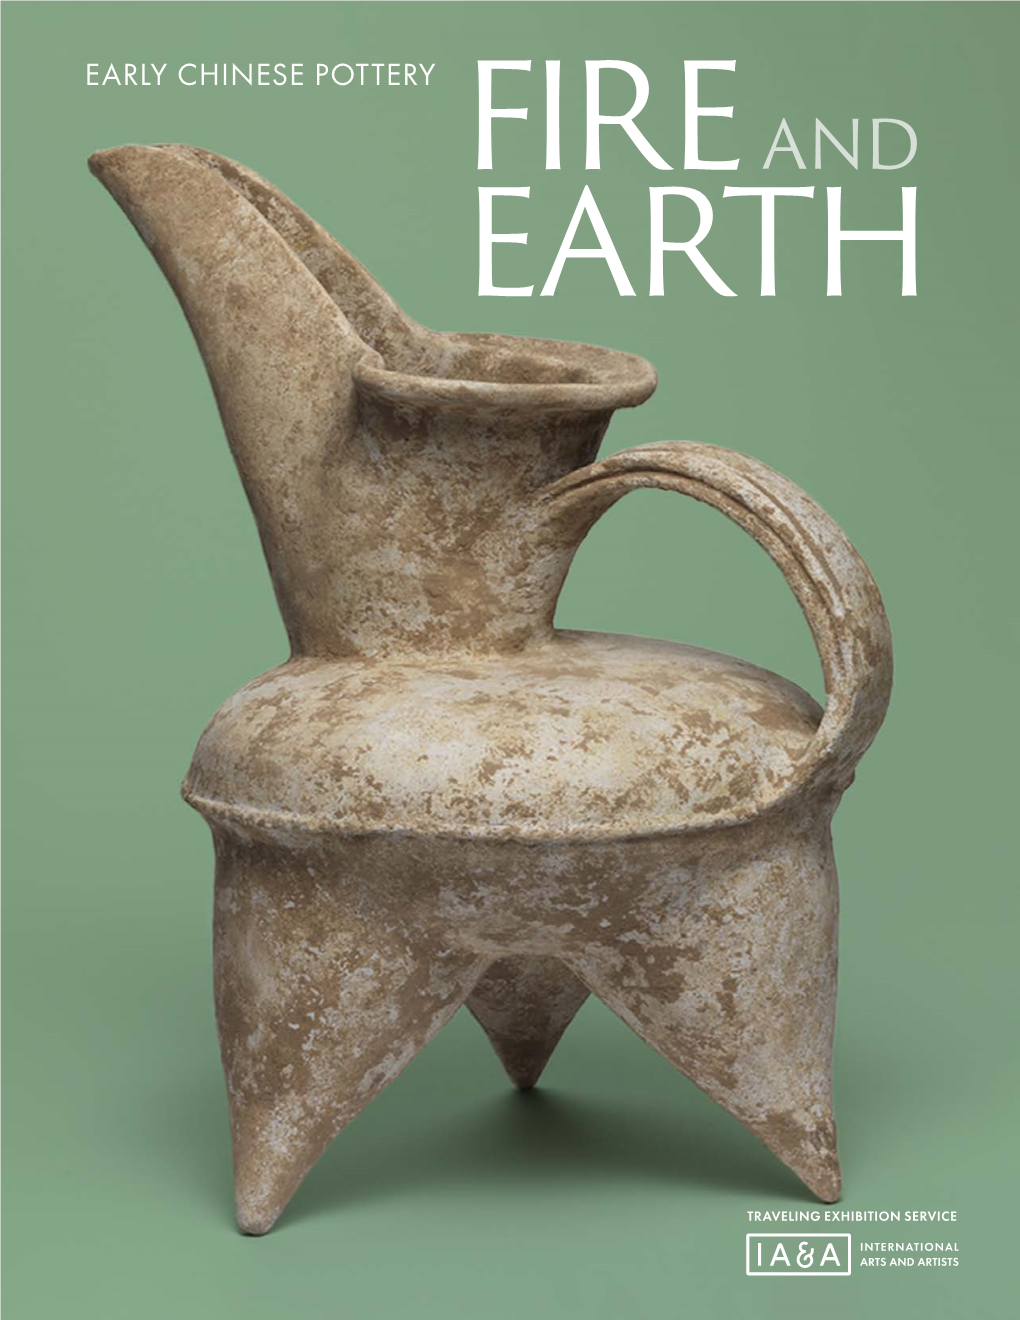 Early Chinese Pottery Fire and Earth